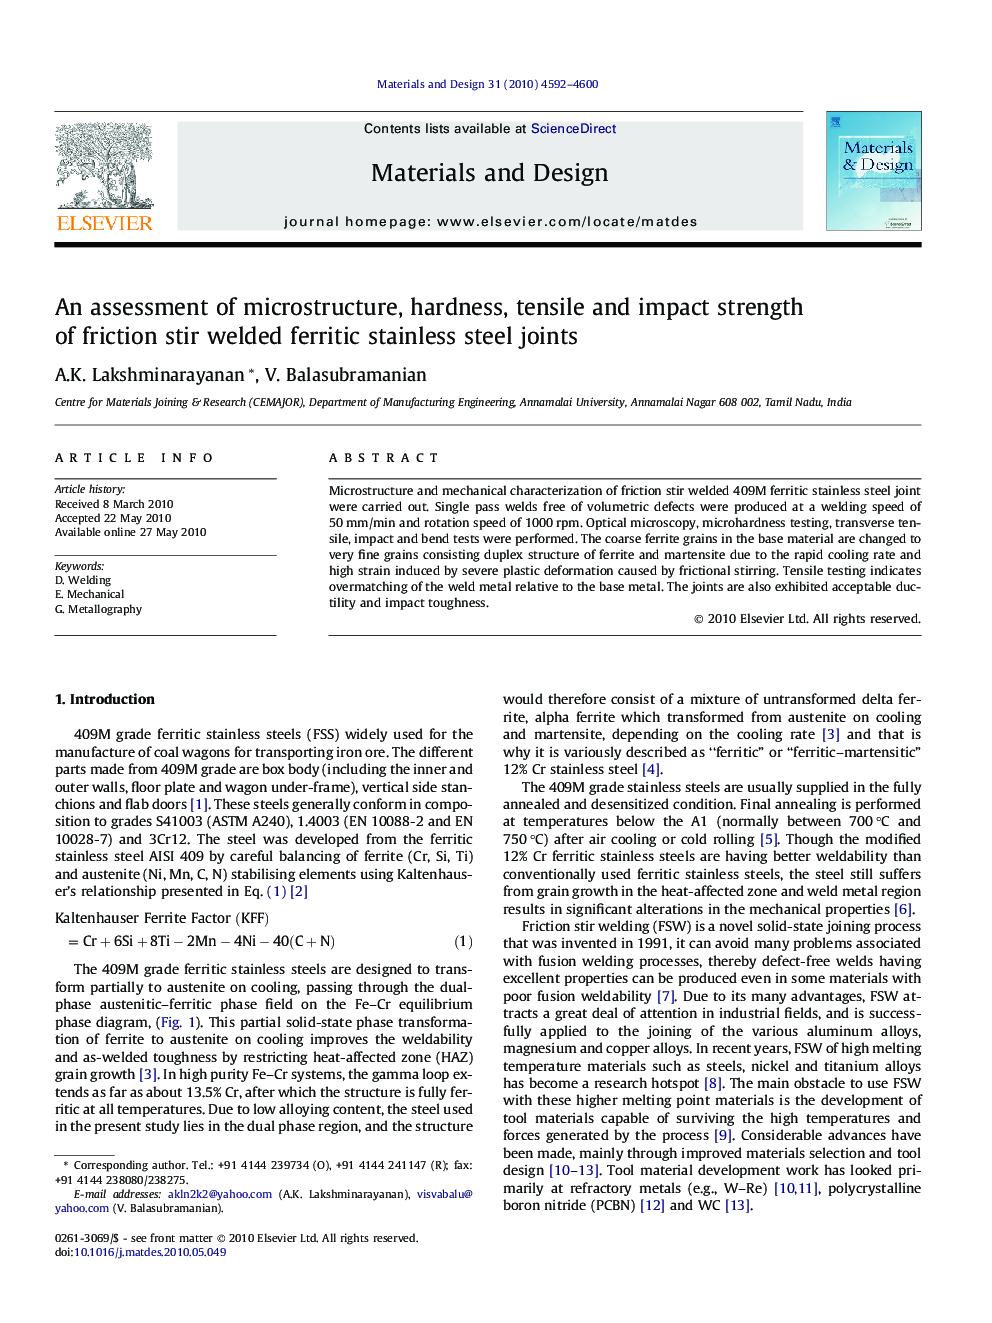 An assessment of microstructure, hardness, tensile and impact strength of friction stir welded ferritic stainless steel joints